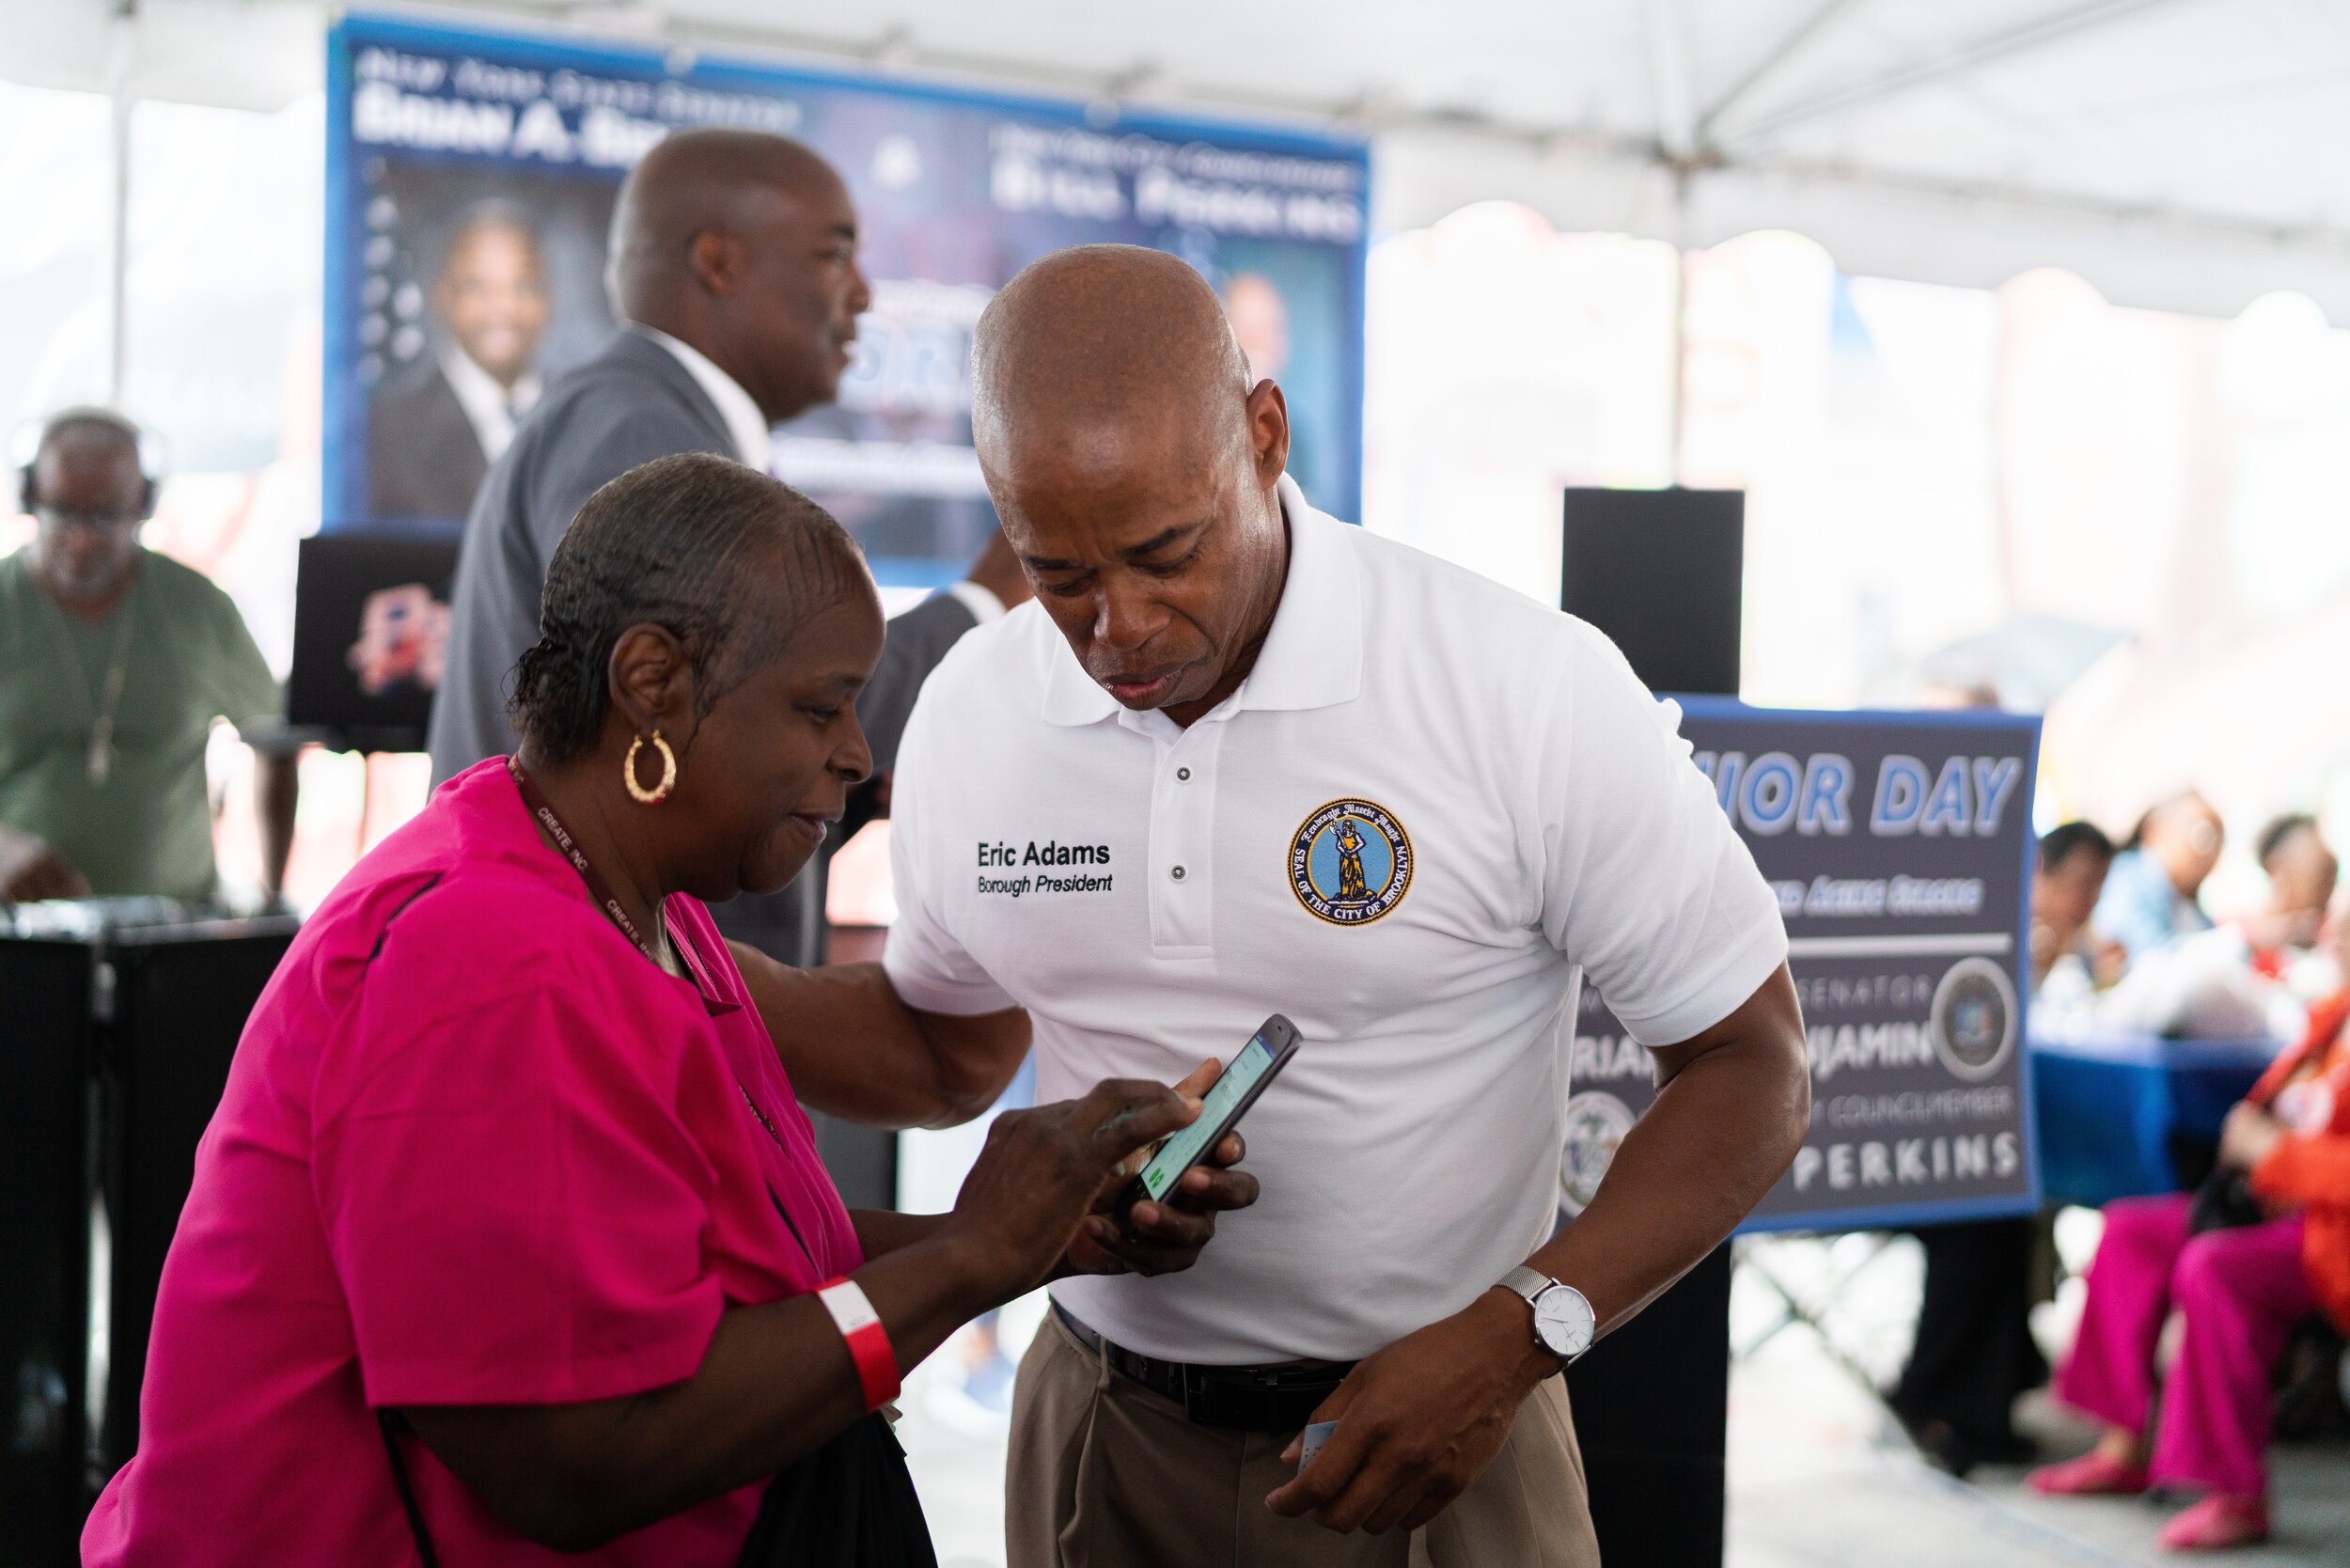   Brooklyn Borough President Eric Adams (a Harlem native) gave out his cell phone number to Harlem seniors, encouraging them to contact him for information about healthcare resources.&nbsp;  